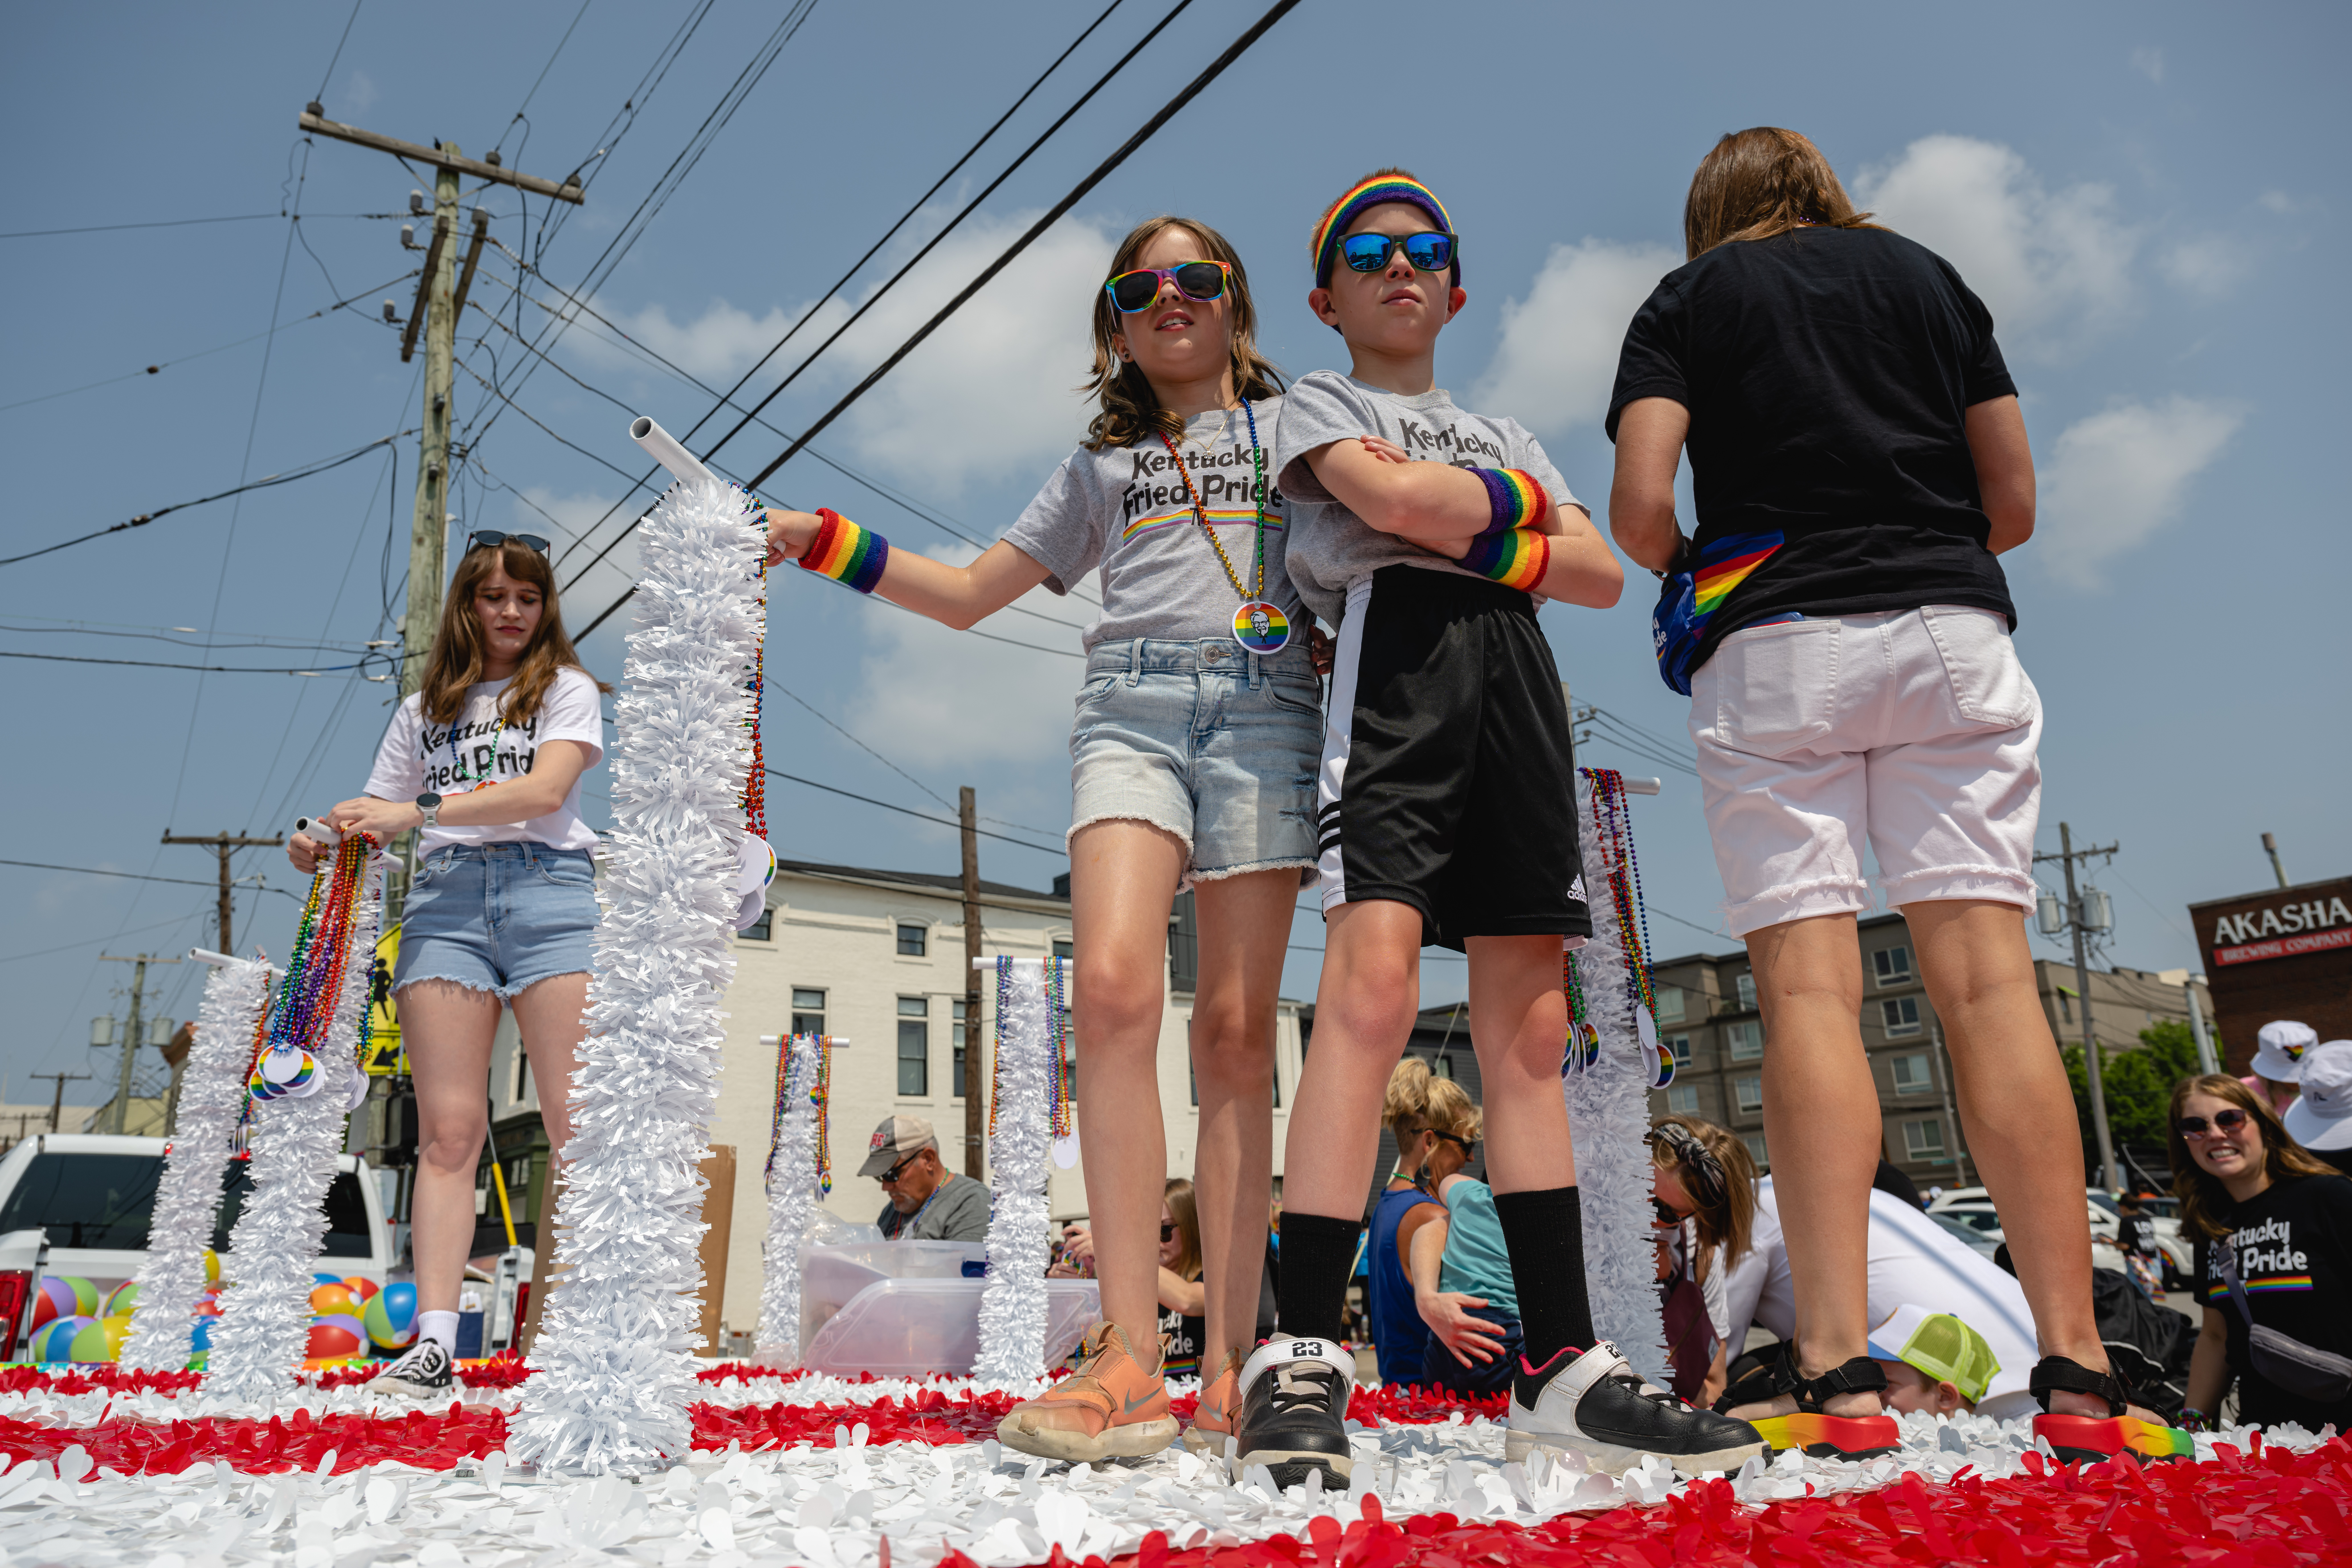 LOUISVILLE, KENTUCKY - JUNE 17: Children stand on top of a Kentucky Fried Chicken float of the Kentuckiana Pride Parade on June 17, 2023 in Louisville, Kentucky. According to the American Civil Liberties Union, nearly 500 anti-LGBTQ+ bills have been introduced across the U.S. in state legislatures since the beginning of 2023. (Photo by Jon Cherry/Getty Images)